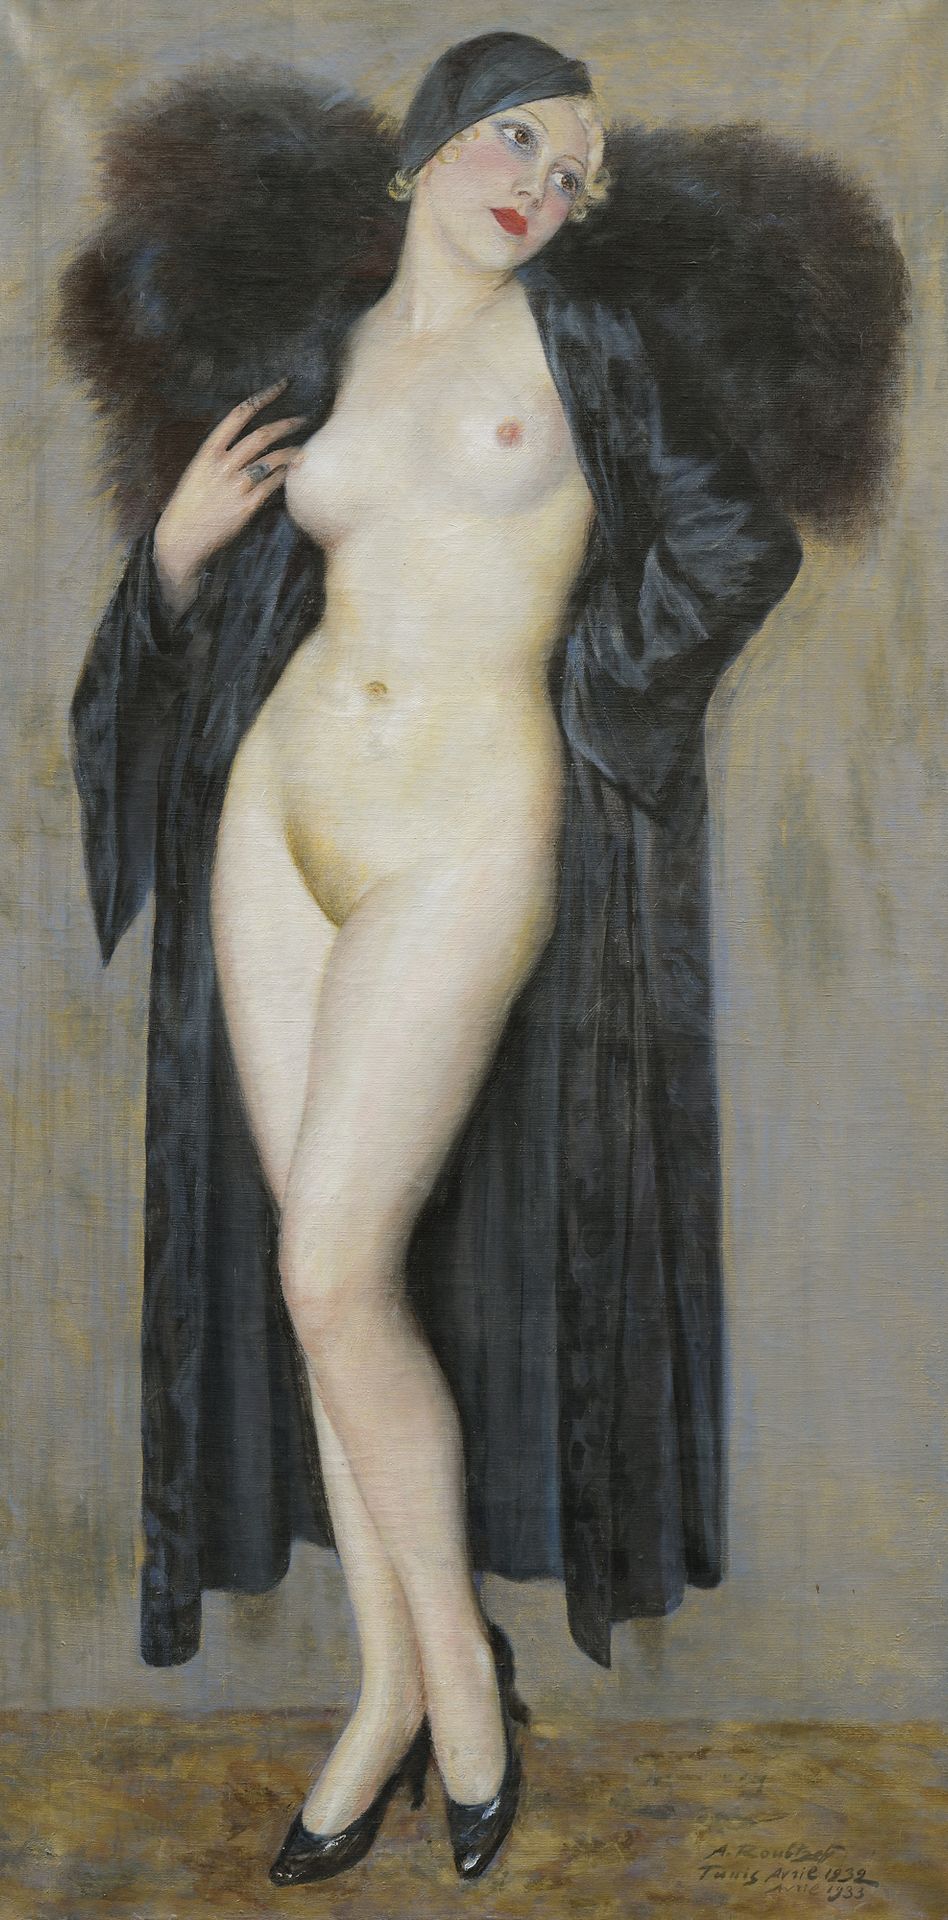 Null Alexandre ROUBTZOFF (1884-1949)

Young Naked Woman under her Coat and Fur C&hellip;